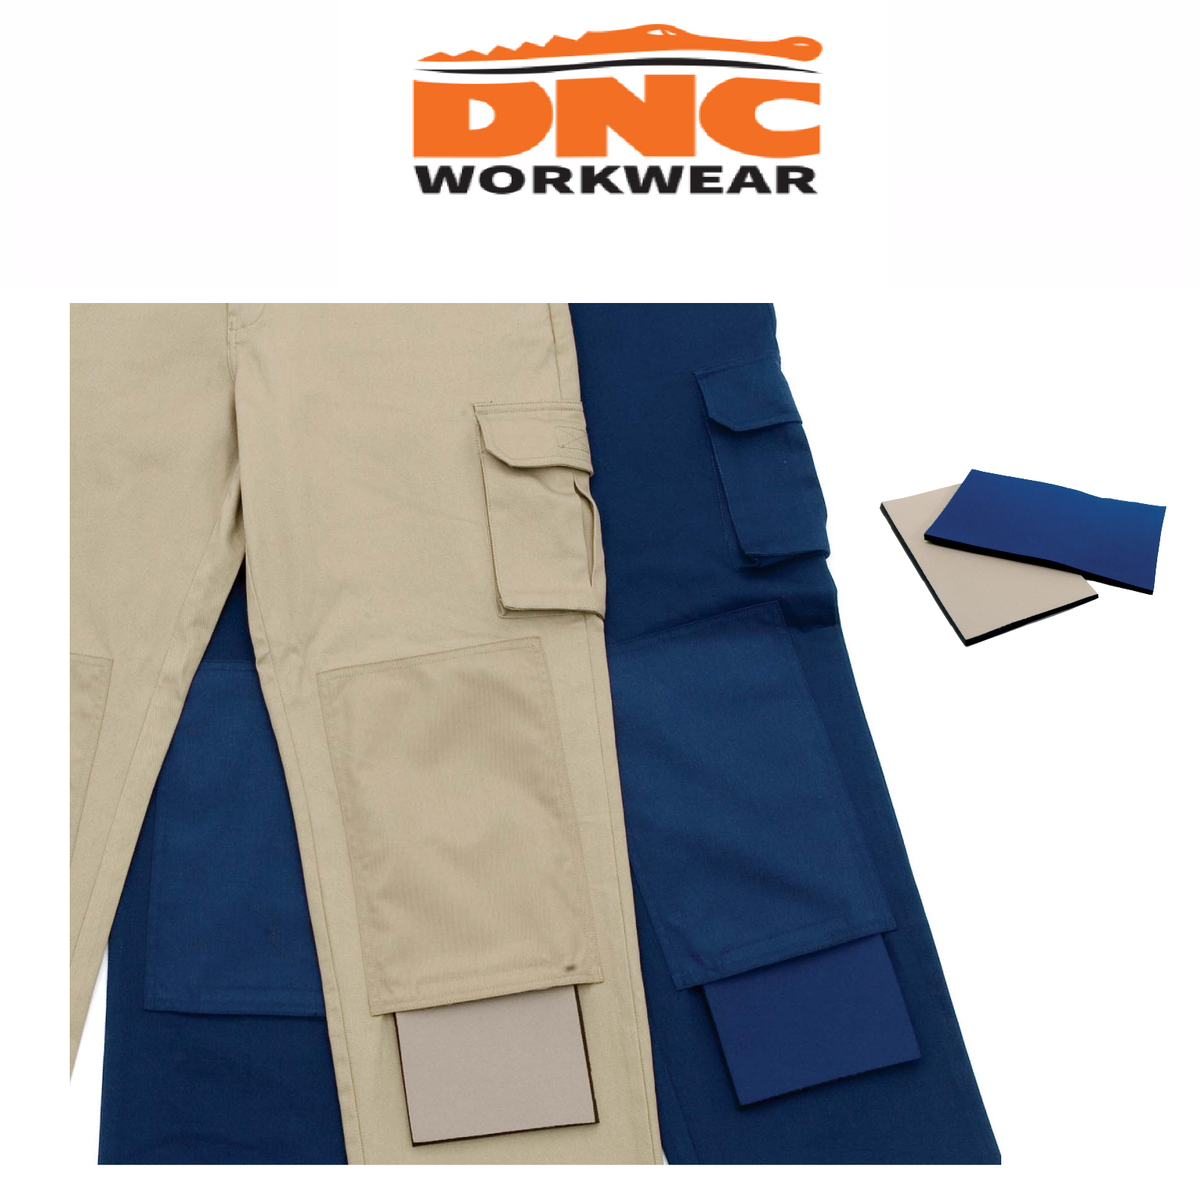 DNC Workwear Mens Cushion Knee Pads 1 Pair Per Pack Work Safety 3325